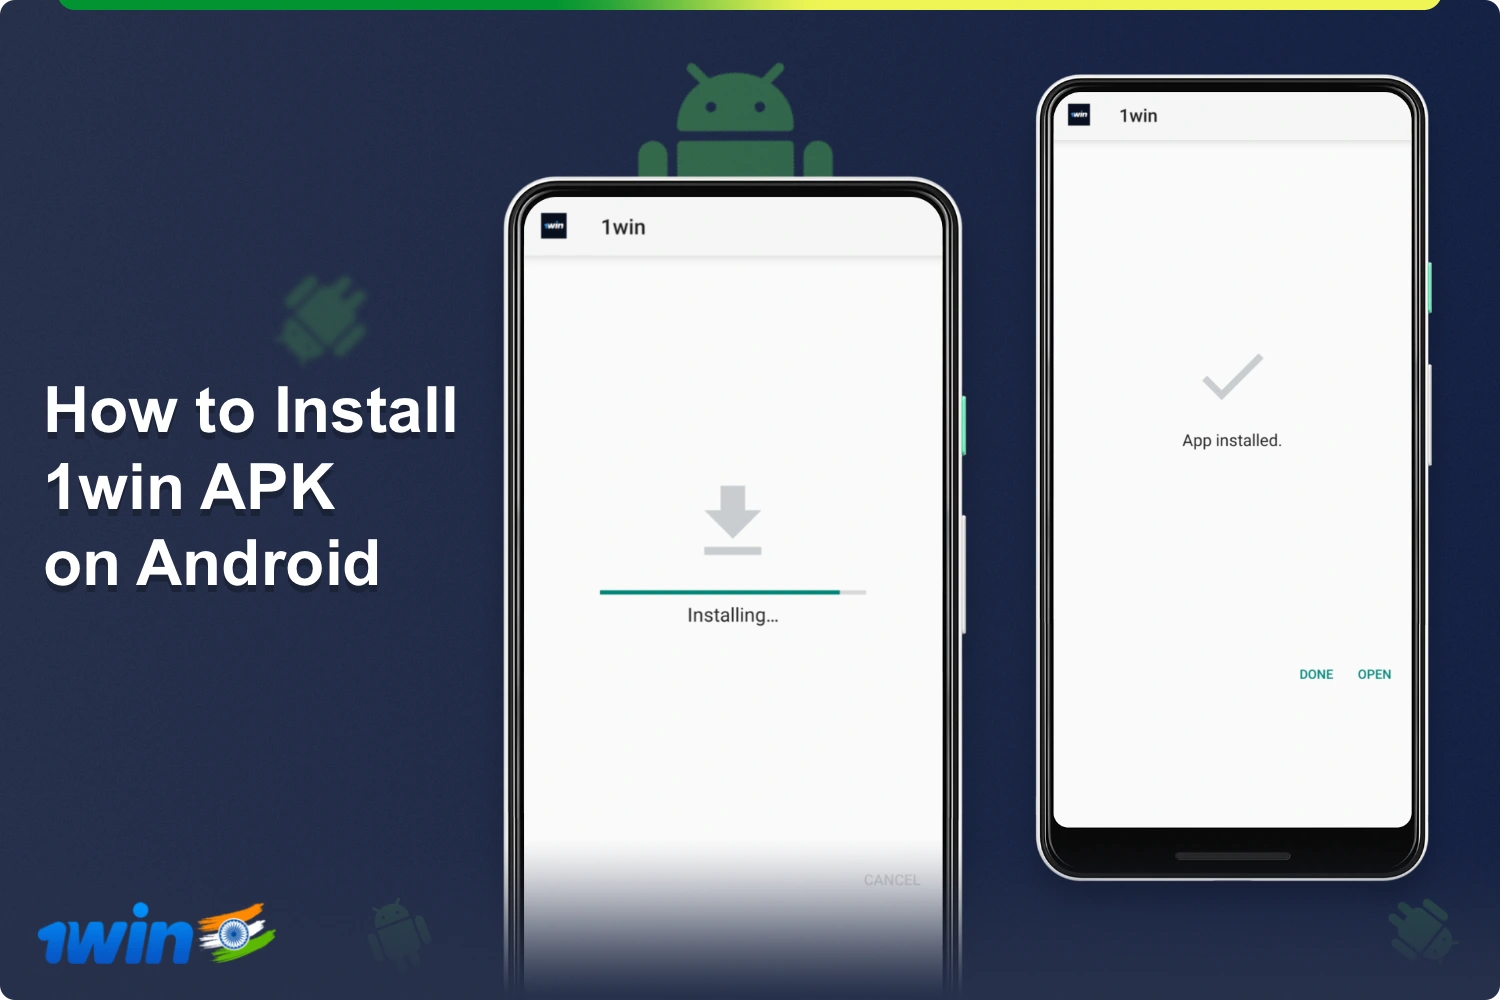 In order to install the mobile app 1win on Android, you need to follow a few simple steps